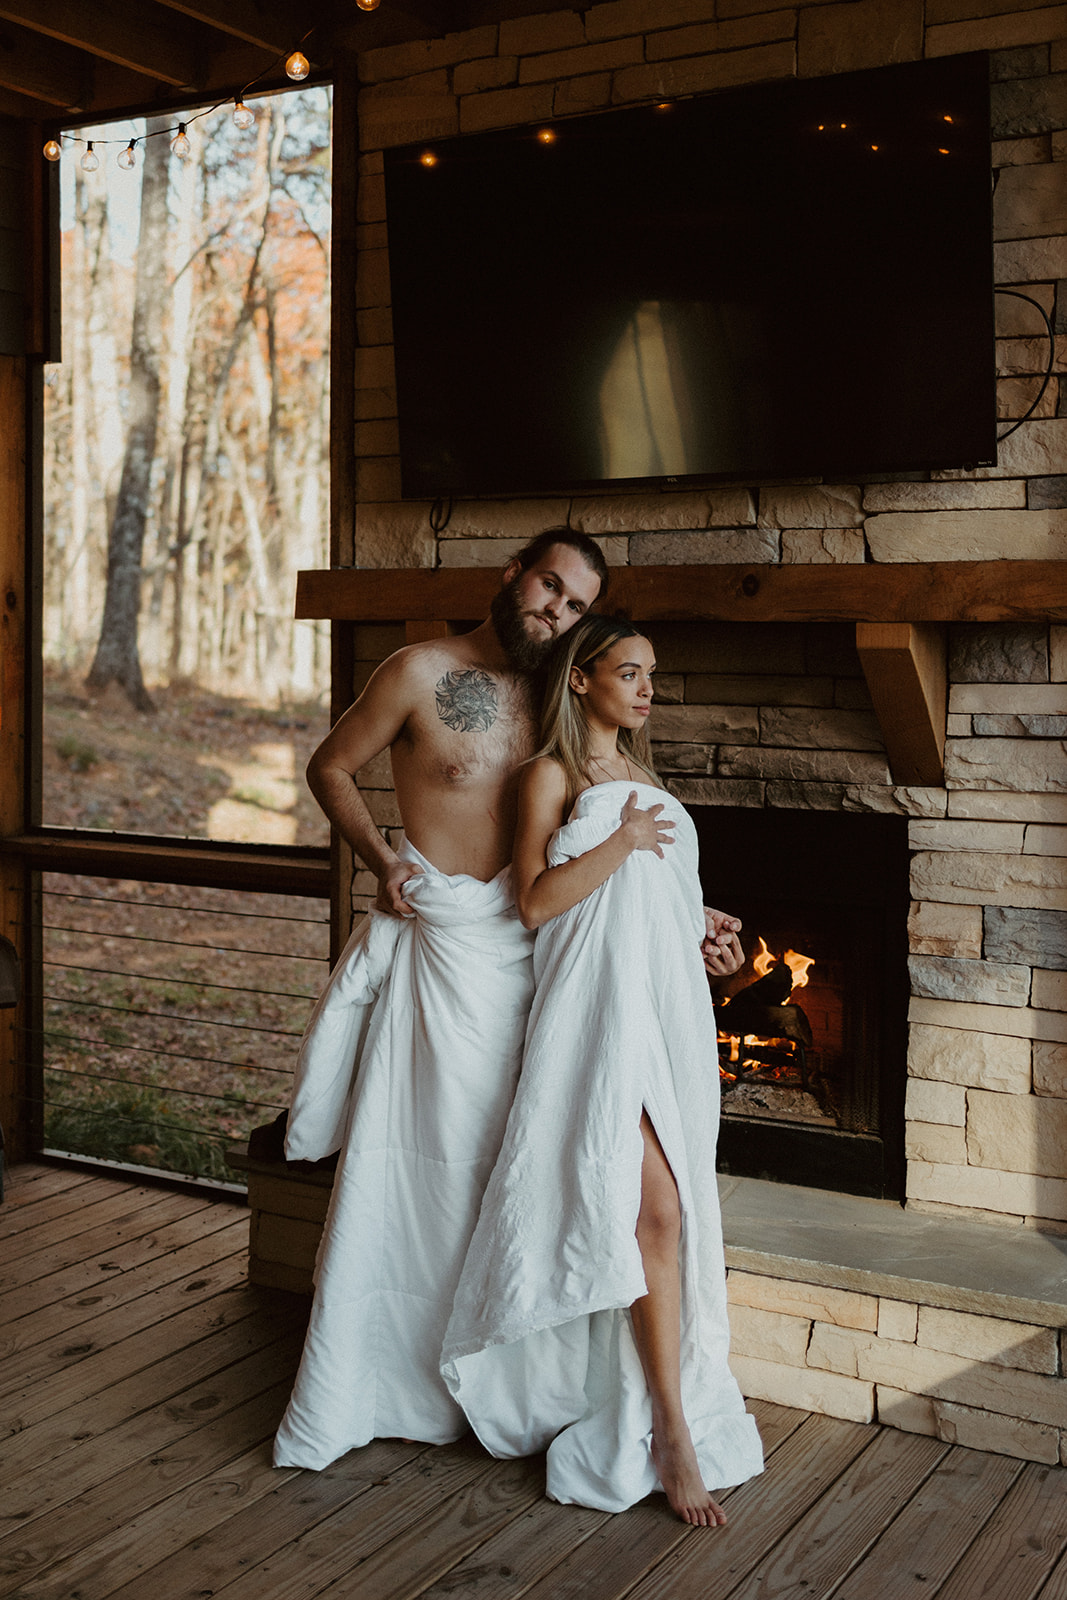 the couple standing in front of the fireplace